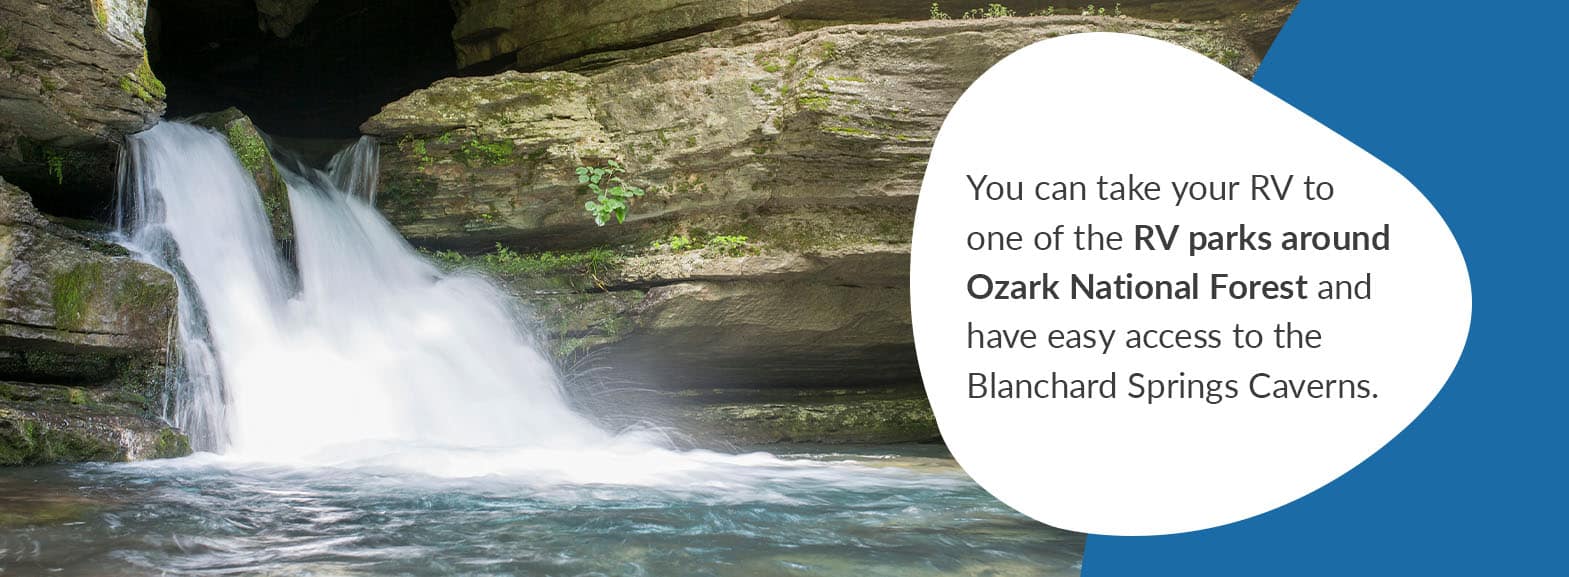 Blanchard Springs Caverns. You can take your RV to one of the RV parks around Ozark National Forest and have easy access to the Blanchard Springs Caverns. 